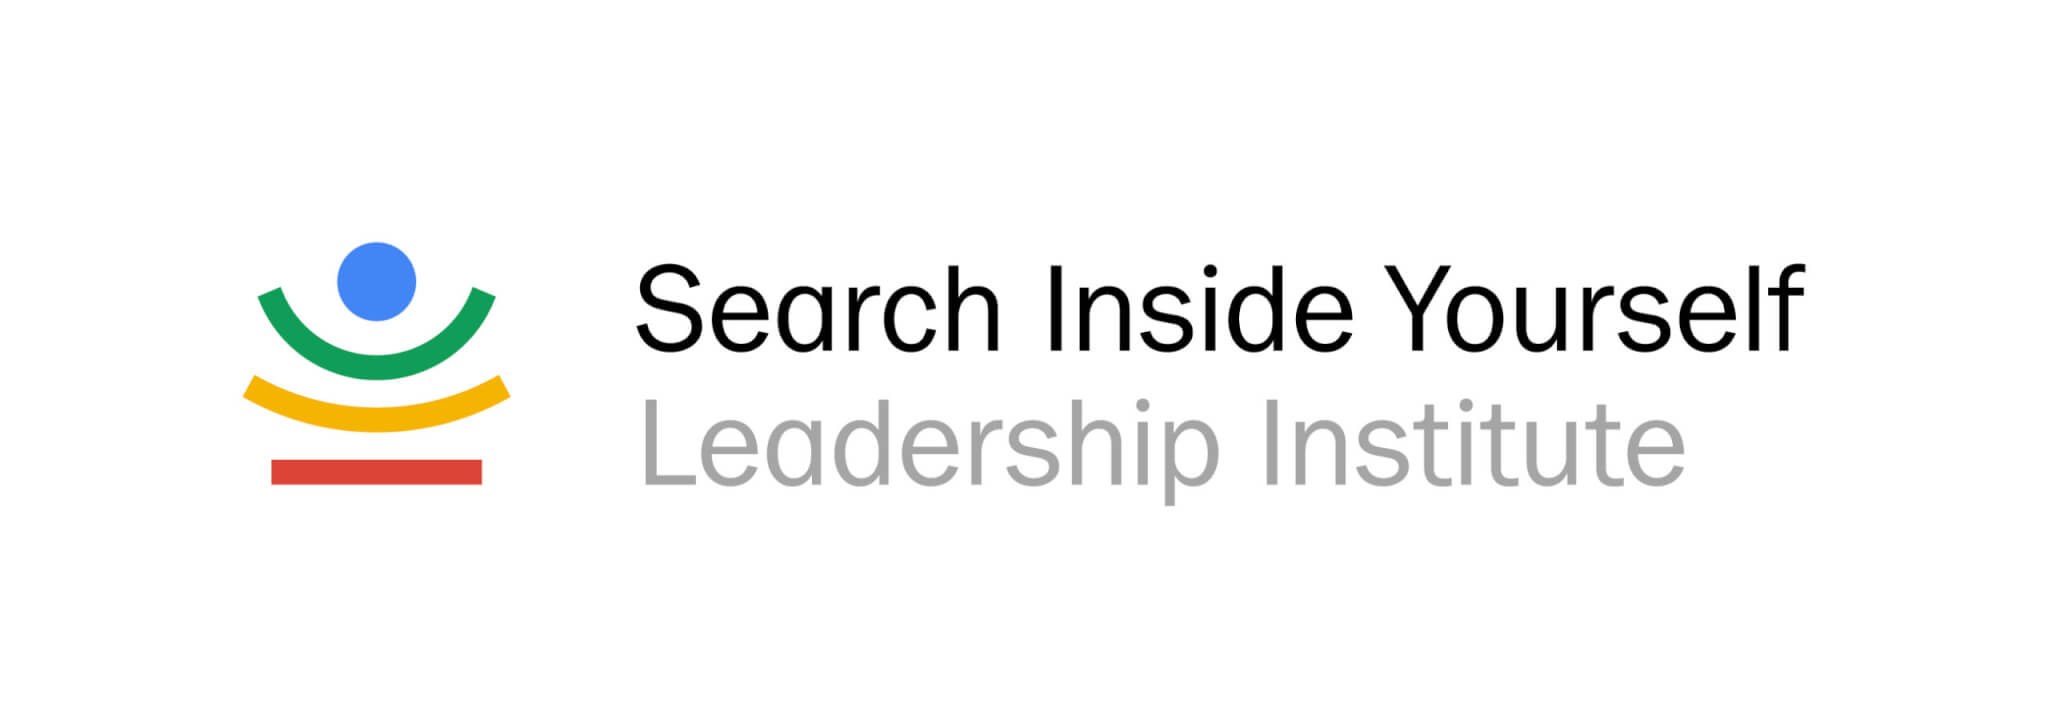 Search Inside Yourself Leadership Institute 